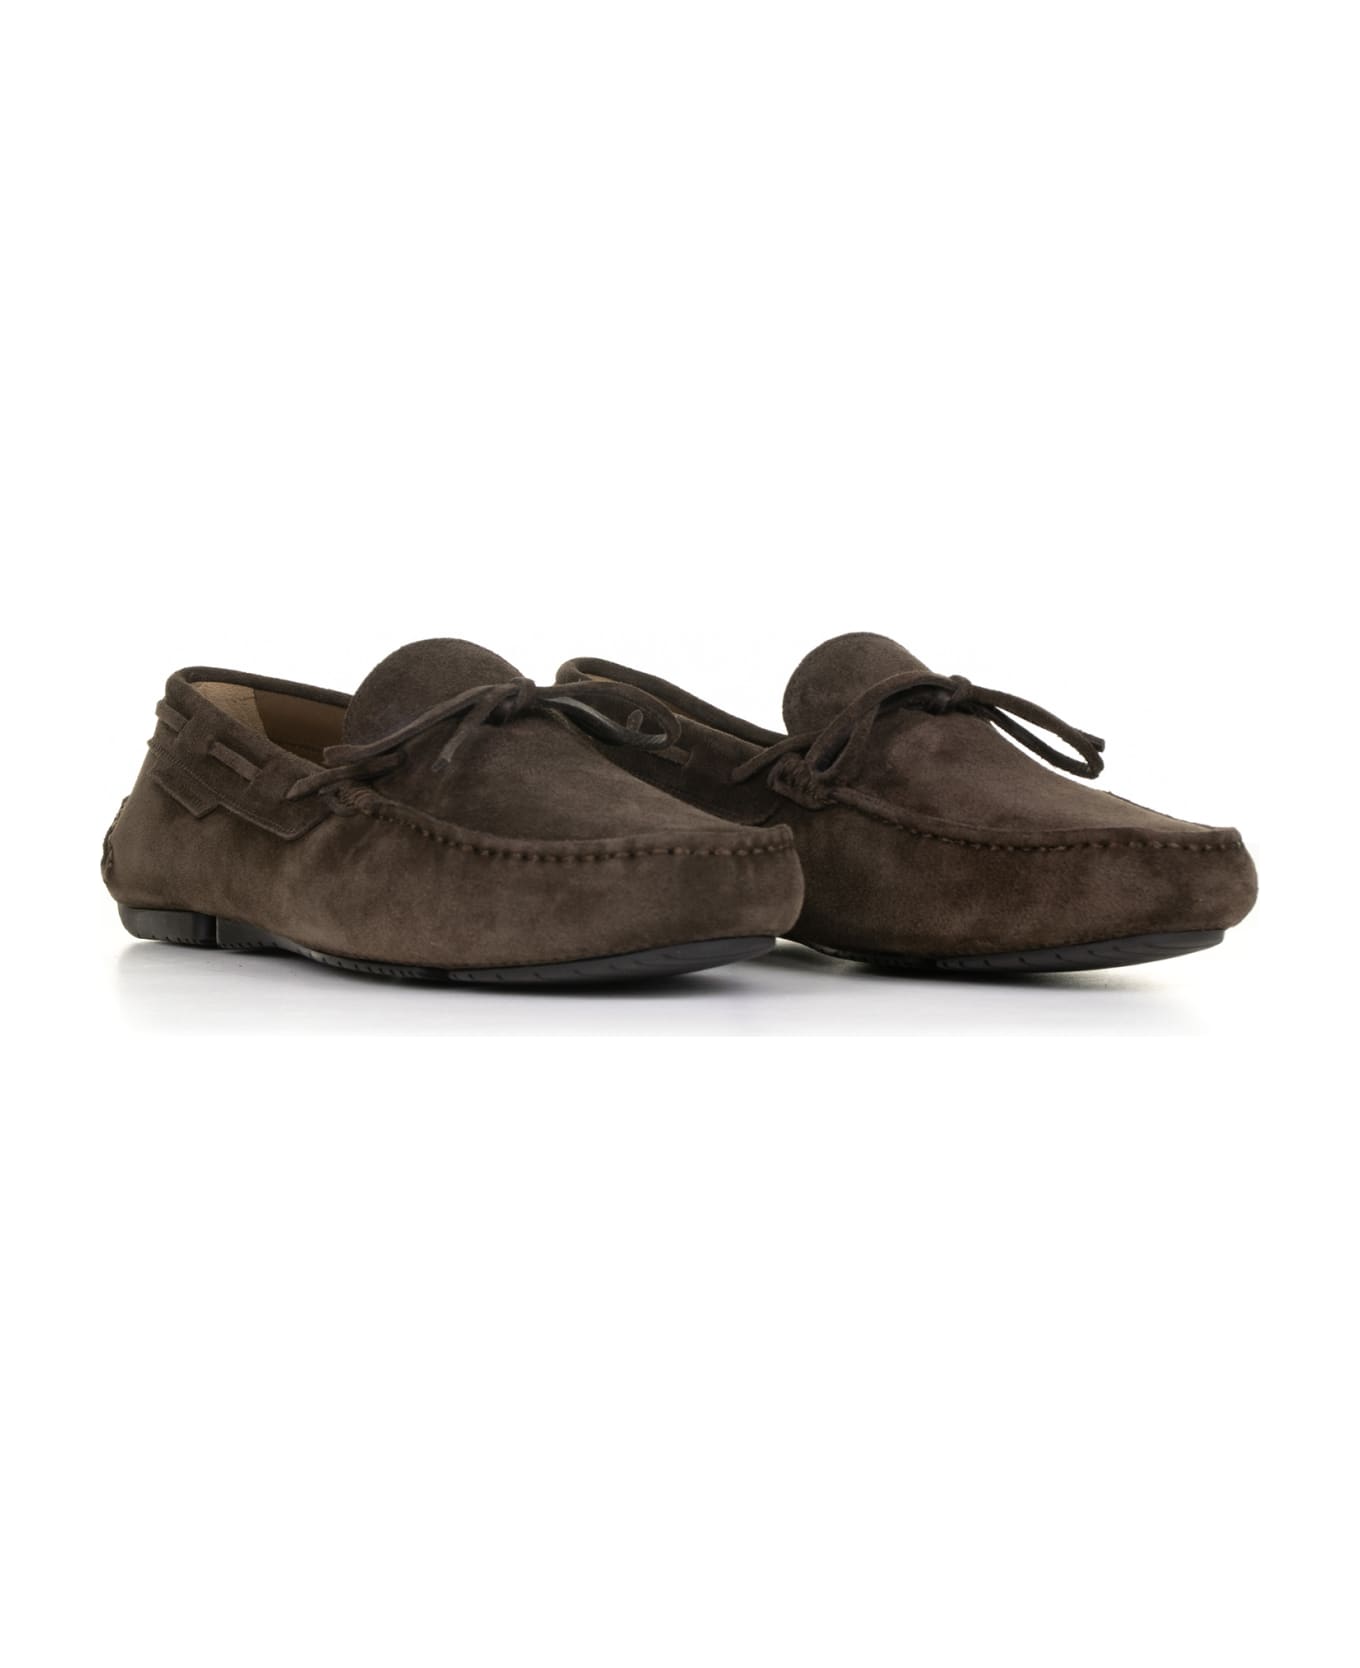 Fratelli Rossetti One Brown Suede Moccasin - T.MORO ローファー＆デッキシューズ